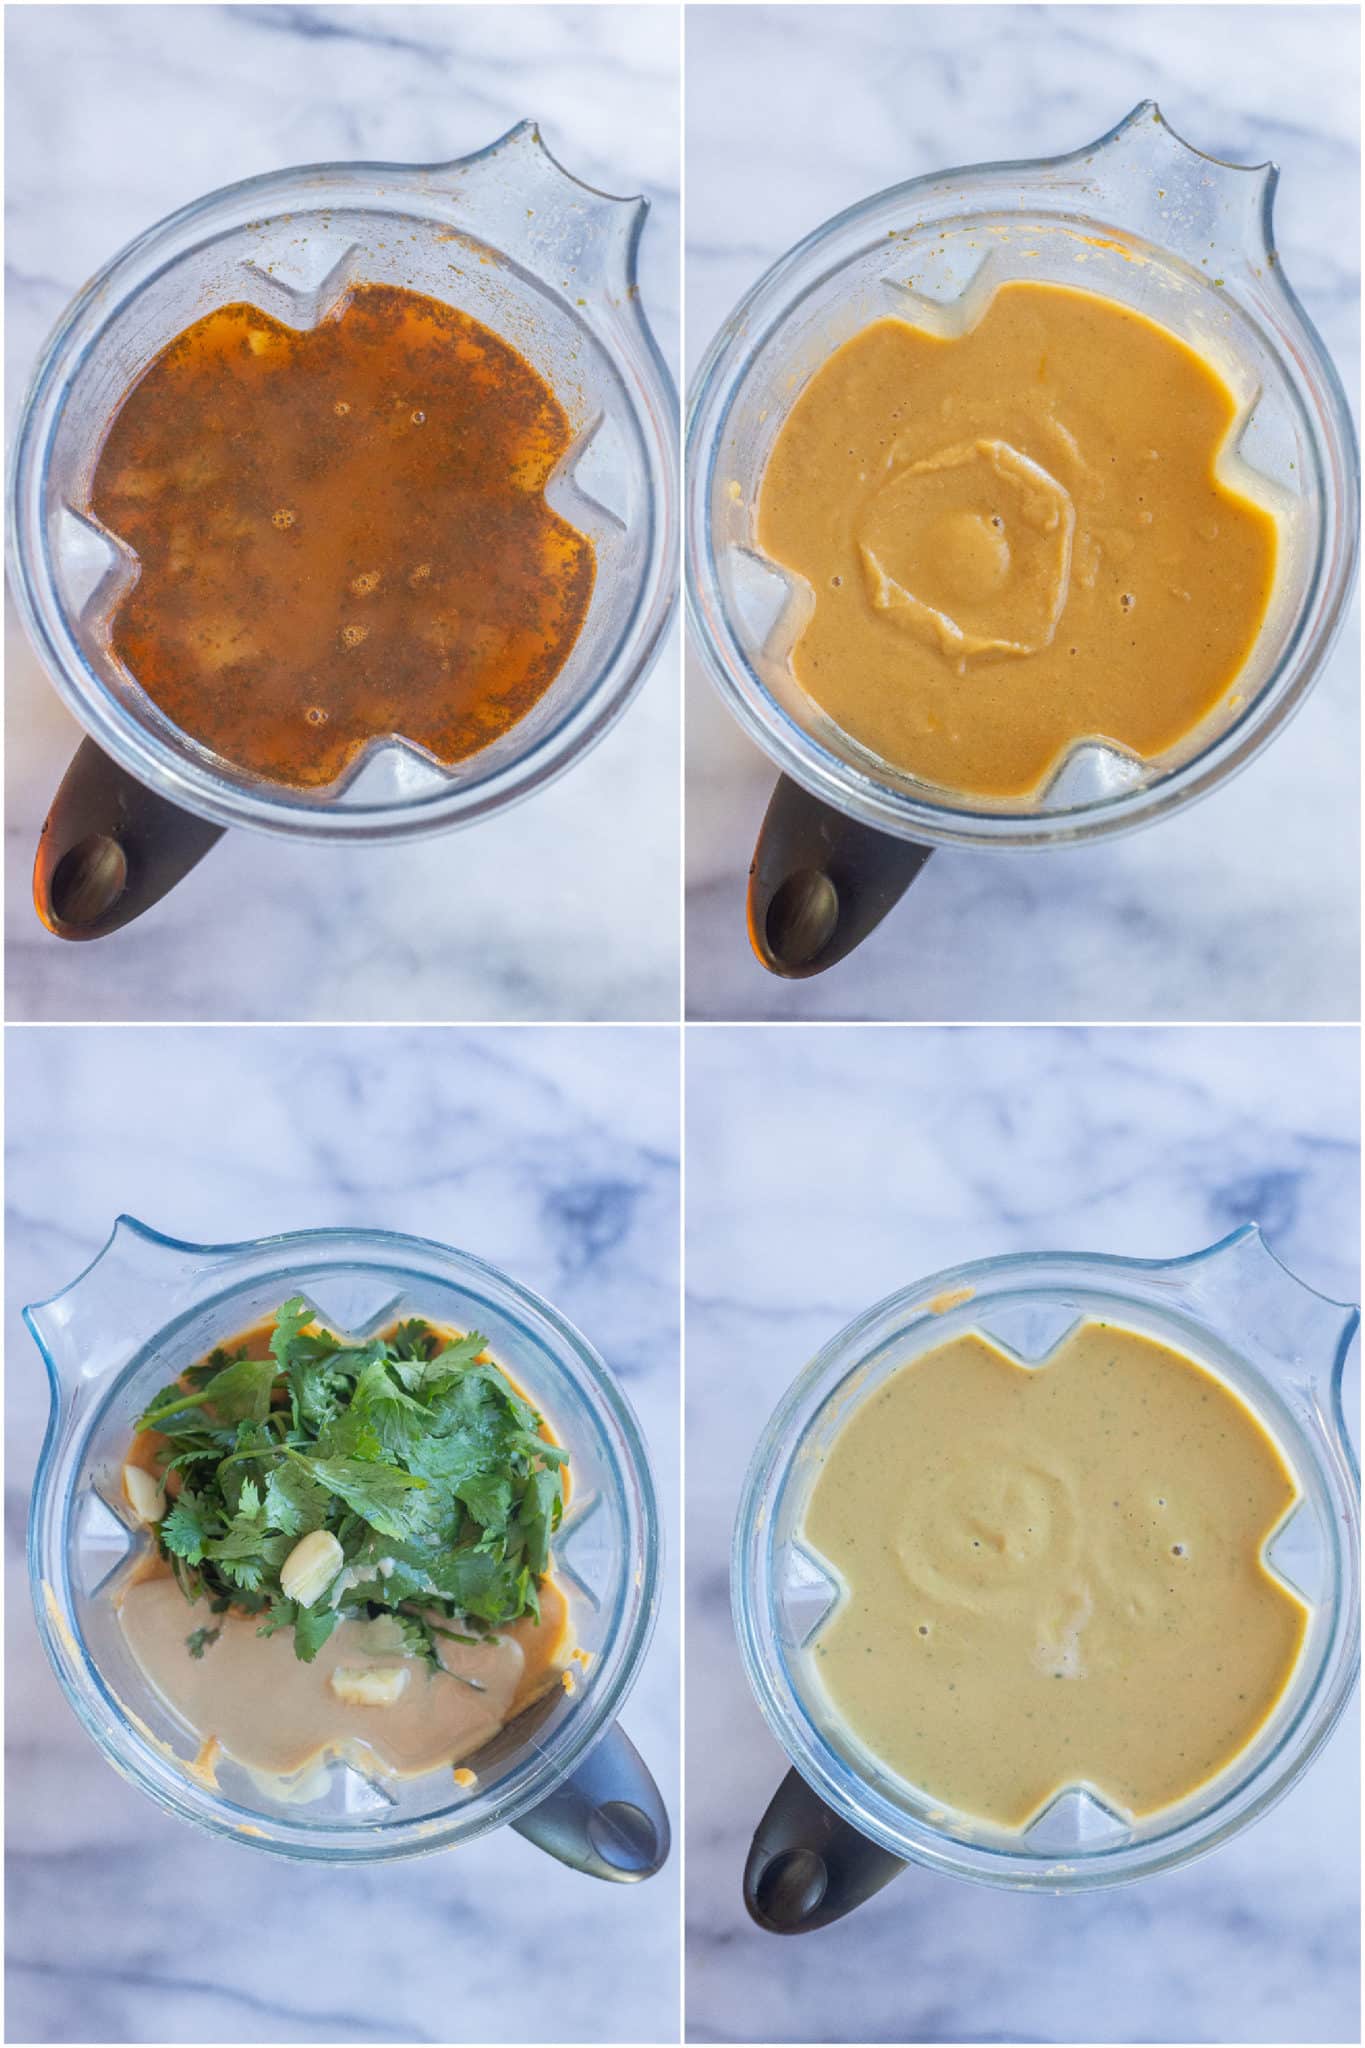 showing how to blend the chickpea soup in the blender with tahini and fresh herbs